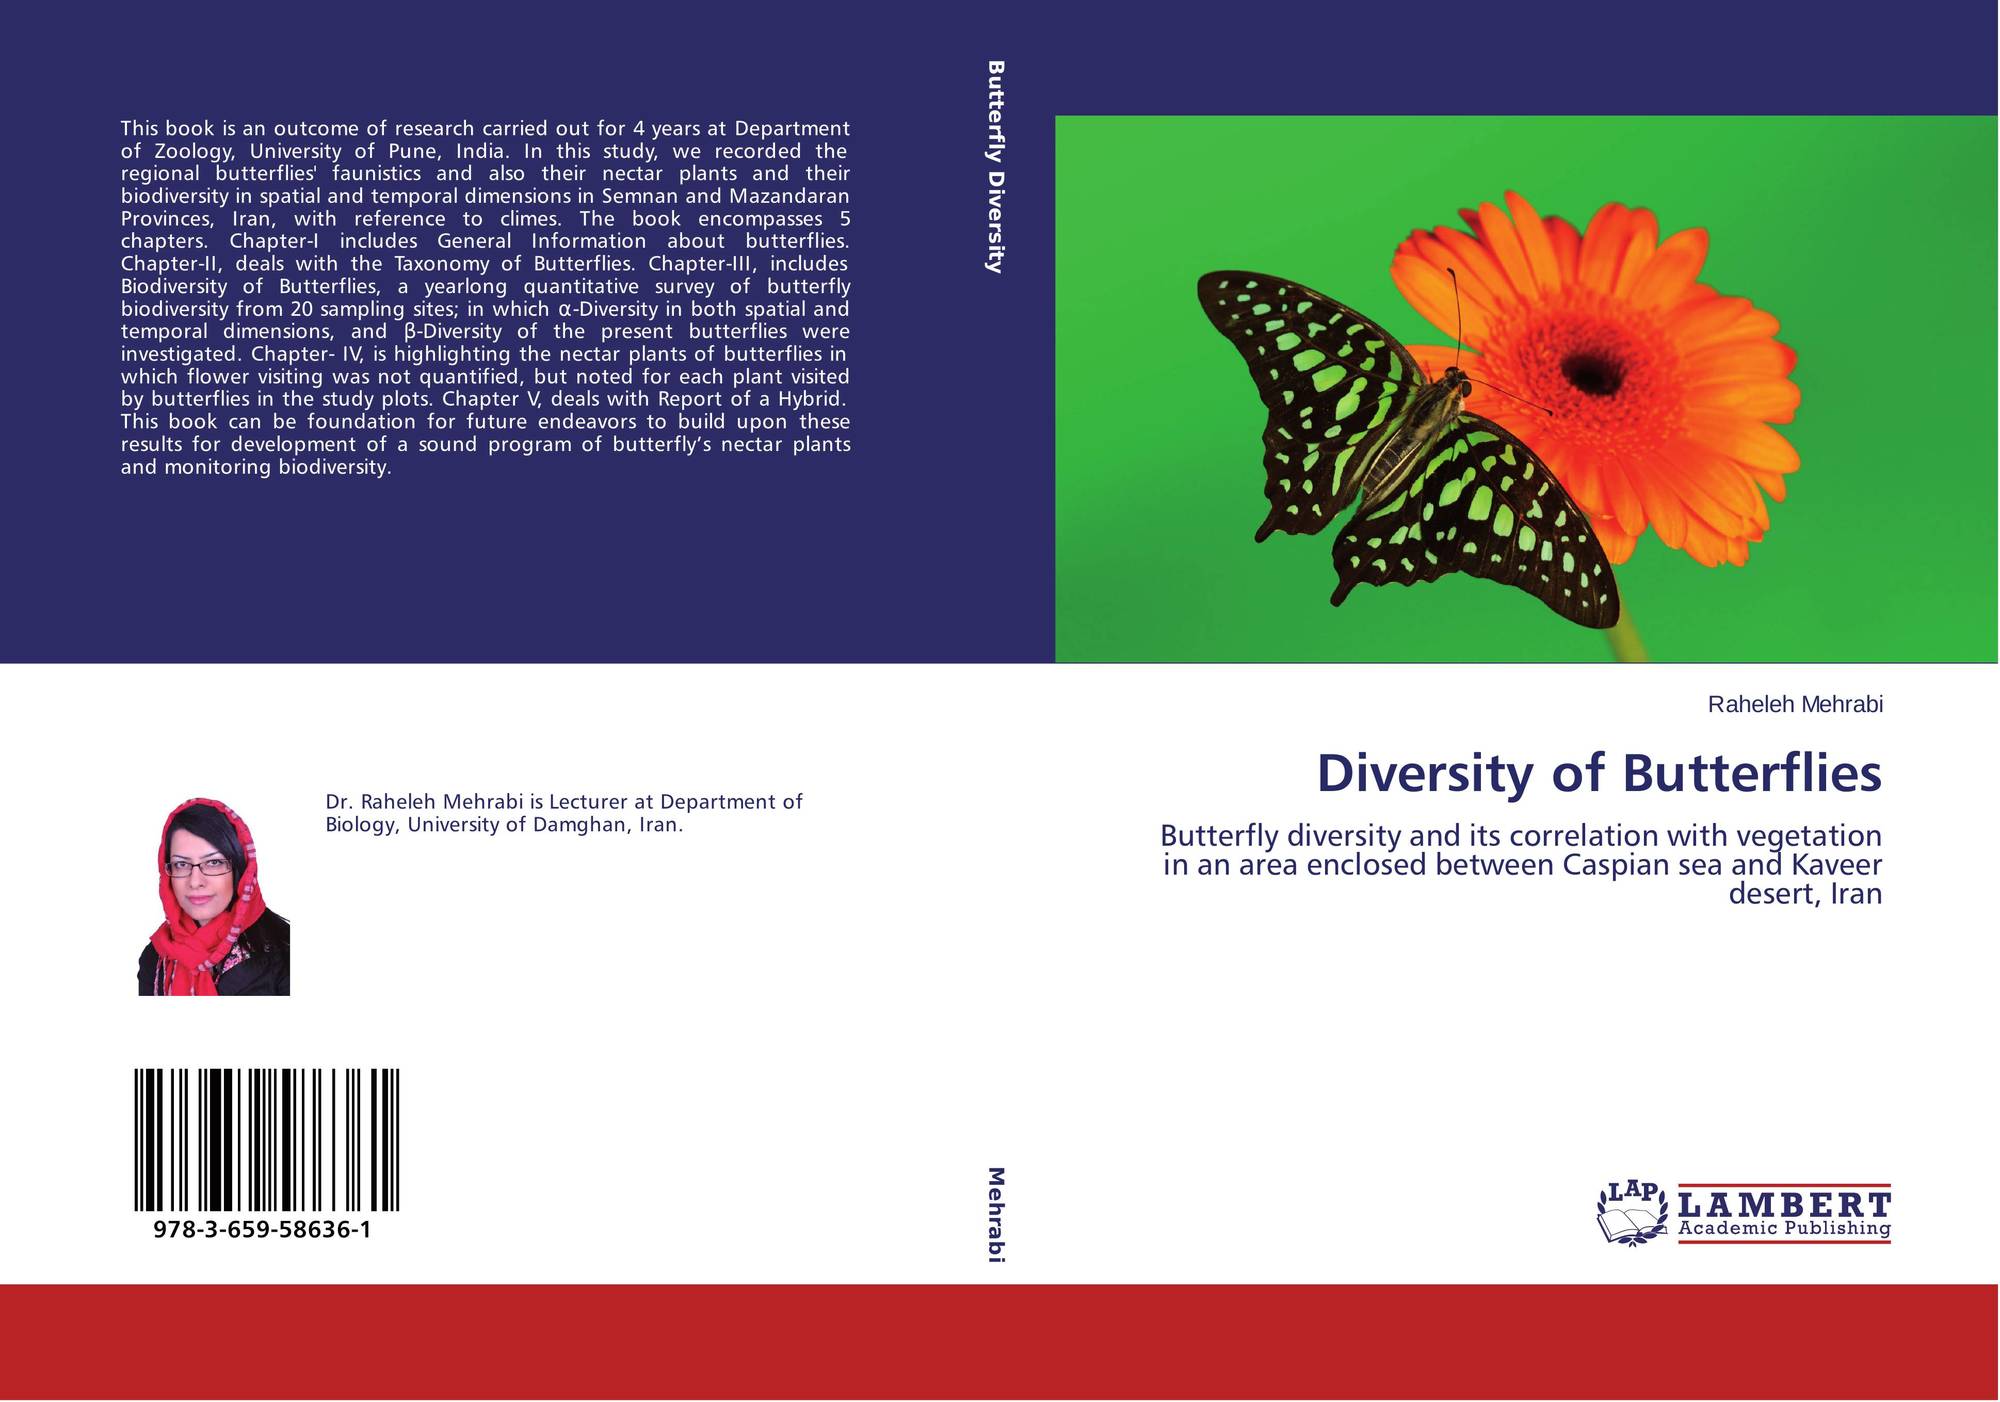 butterfly diversity research paper